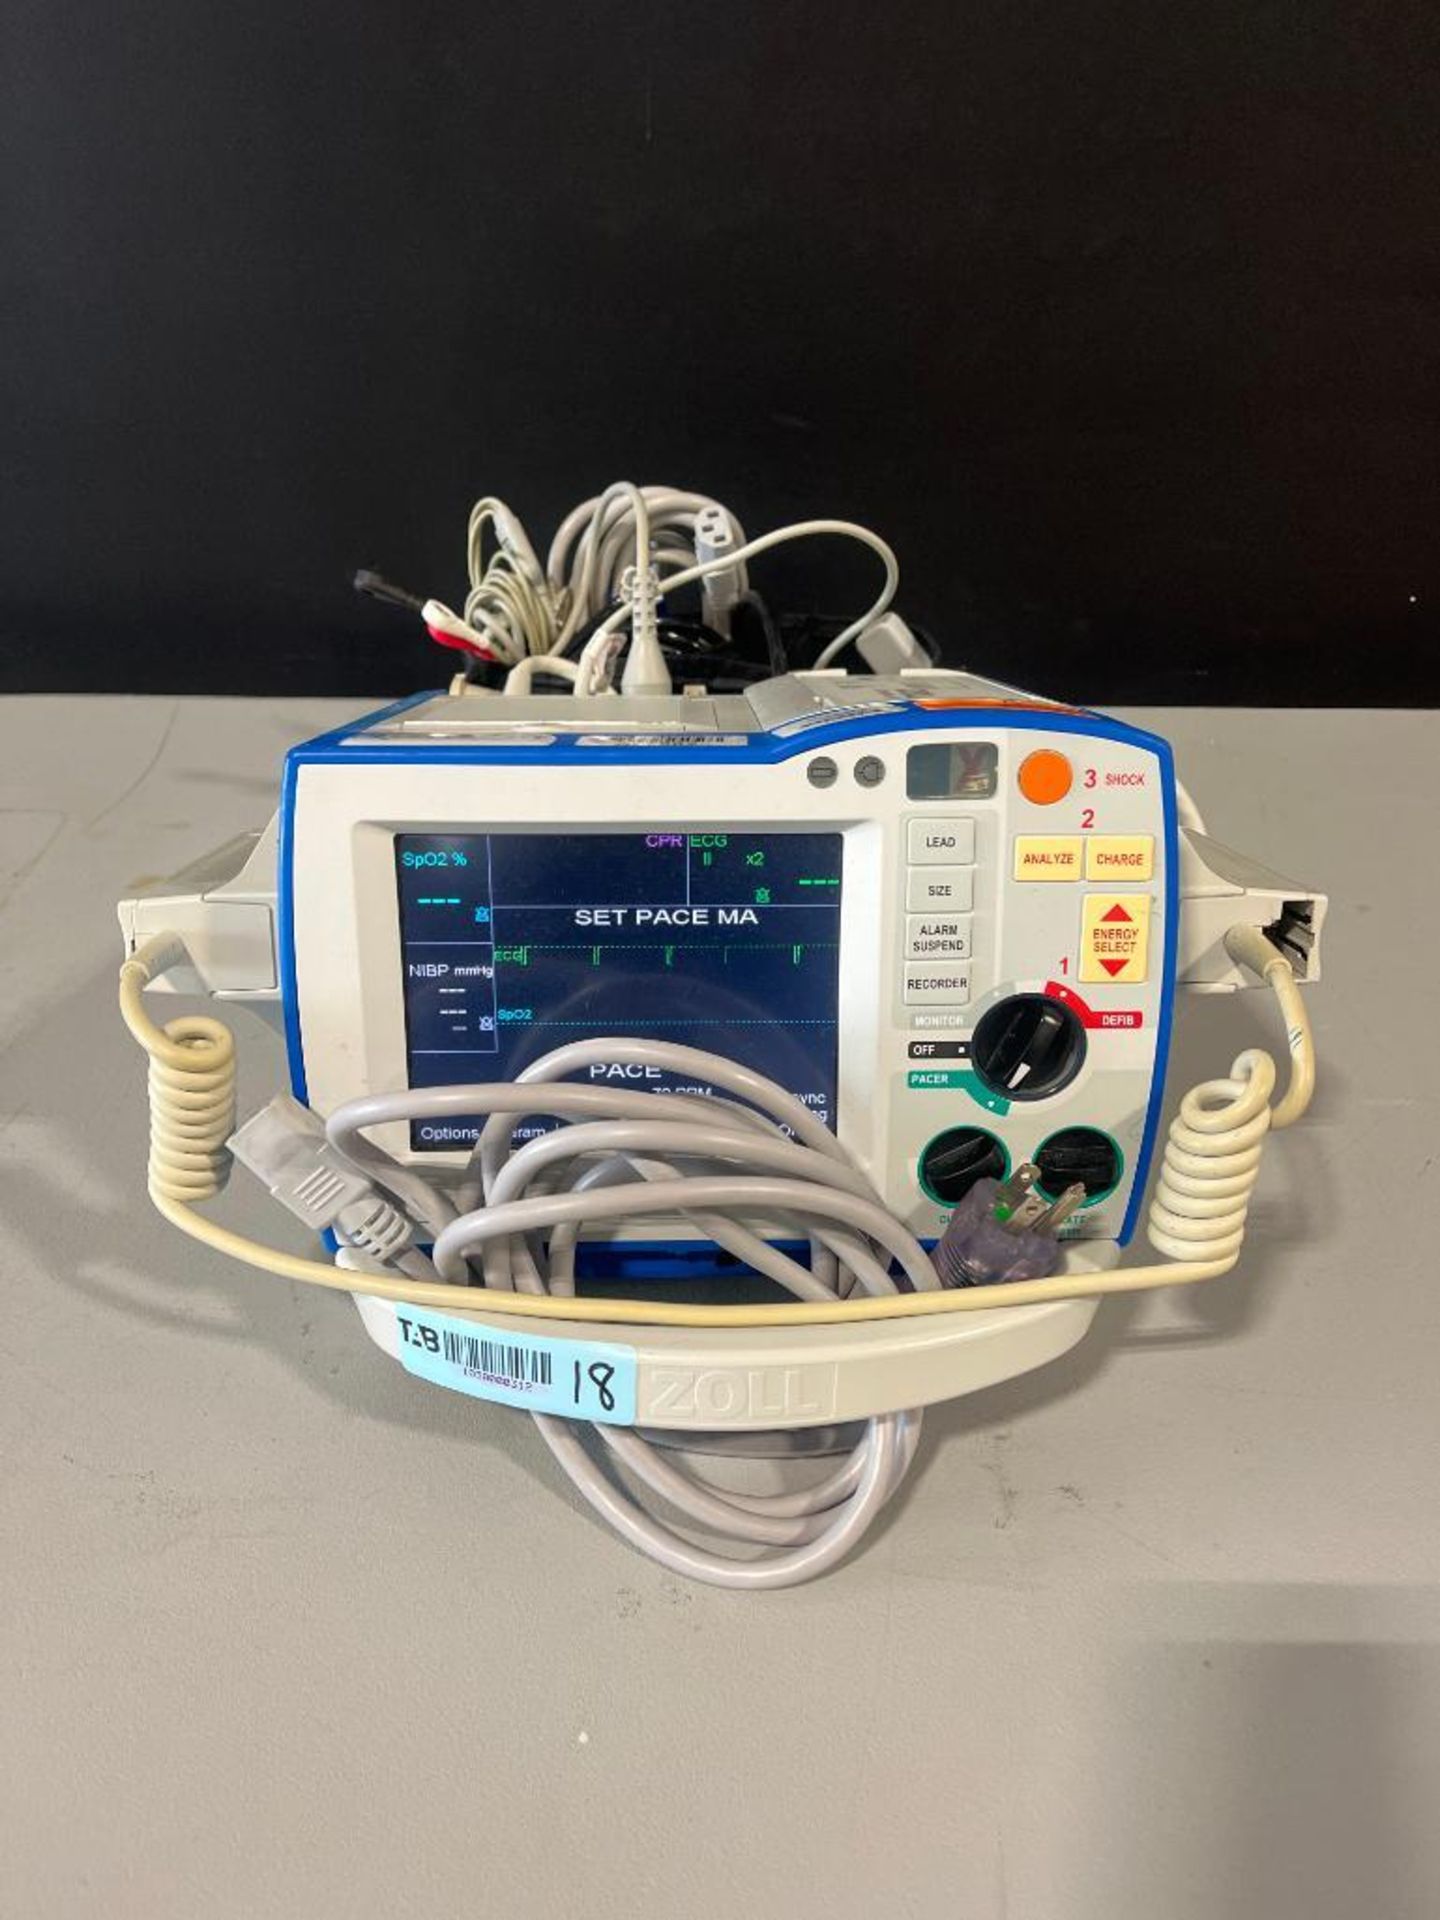 ZOLL R-SERIES ALS DEFIBRILLATOR WITH PACING, ECG,CO2,, SPO2, NIBP, ANALYZE, PADDLES, BATTERY